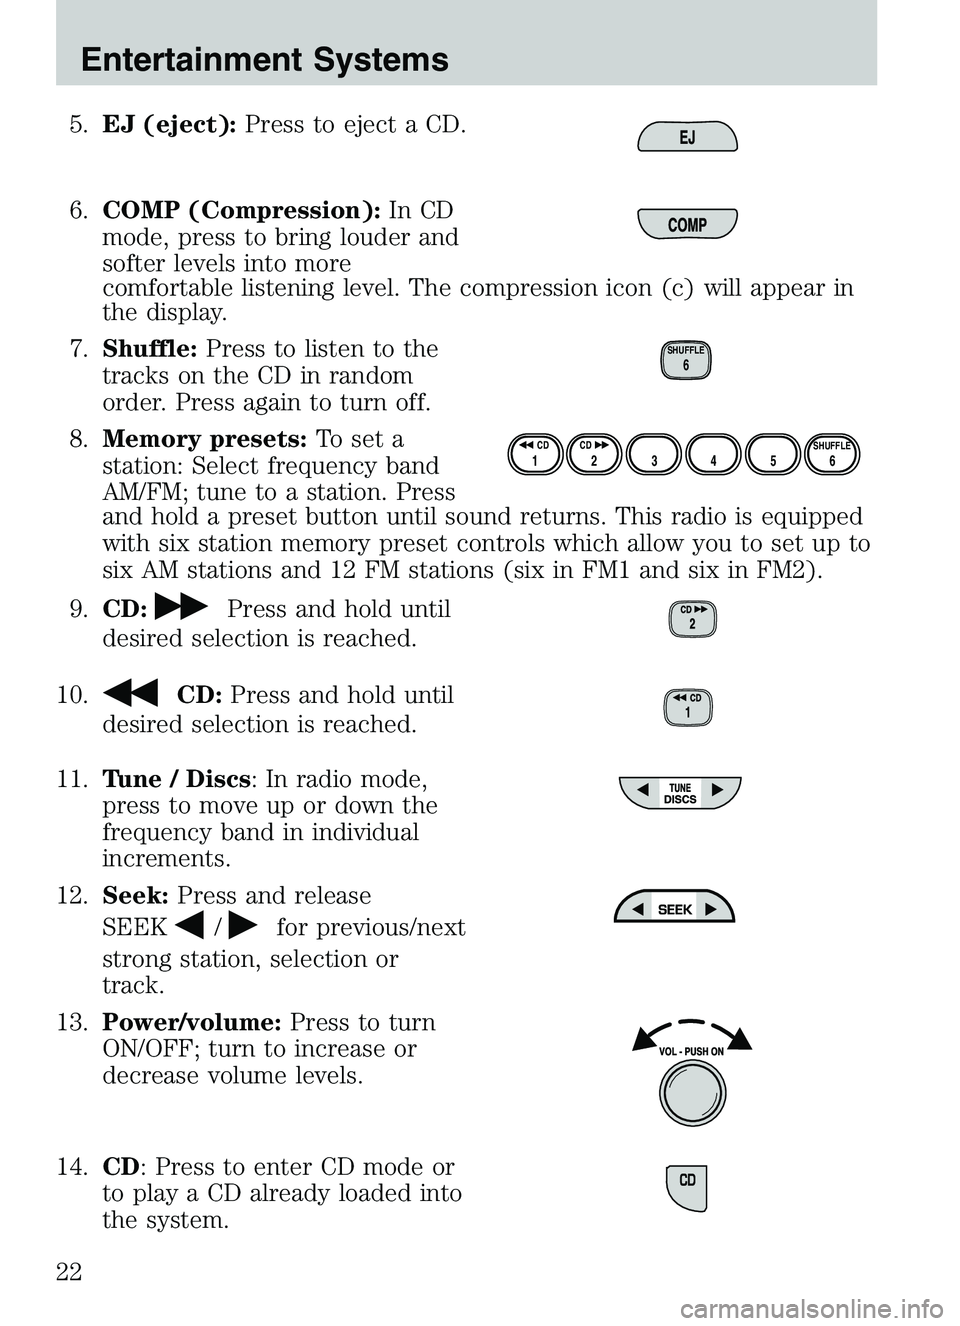 MAZDA MODEL B4000 4WD 2003 Owners Manual 5.EJ (eject): Press to eject a CD.
6. COMP (Compression): In CD
mode, press to bring louder and
softer levels into more
comfortable listening level. The compression icon (c) will appear in
the display